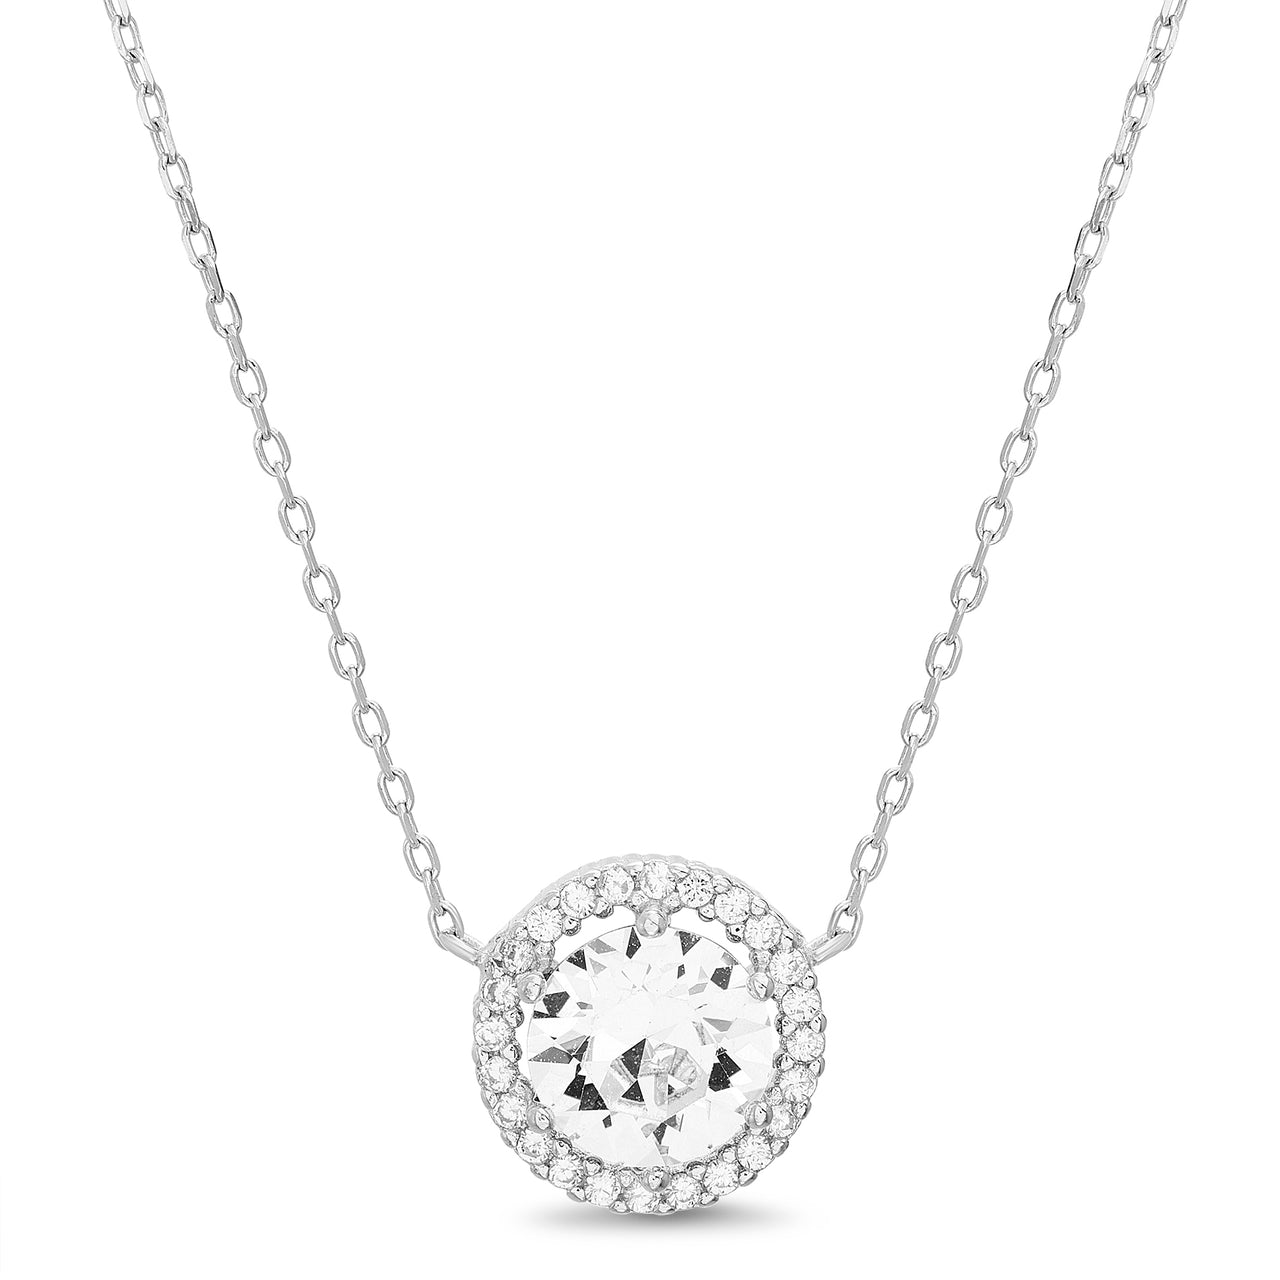  Round Halo Pendant on 18" Necklace for Women in Rhodium Plated 925 Sterling Silver made with Swarovski Crystals